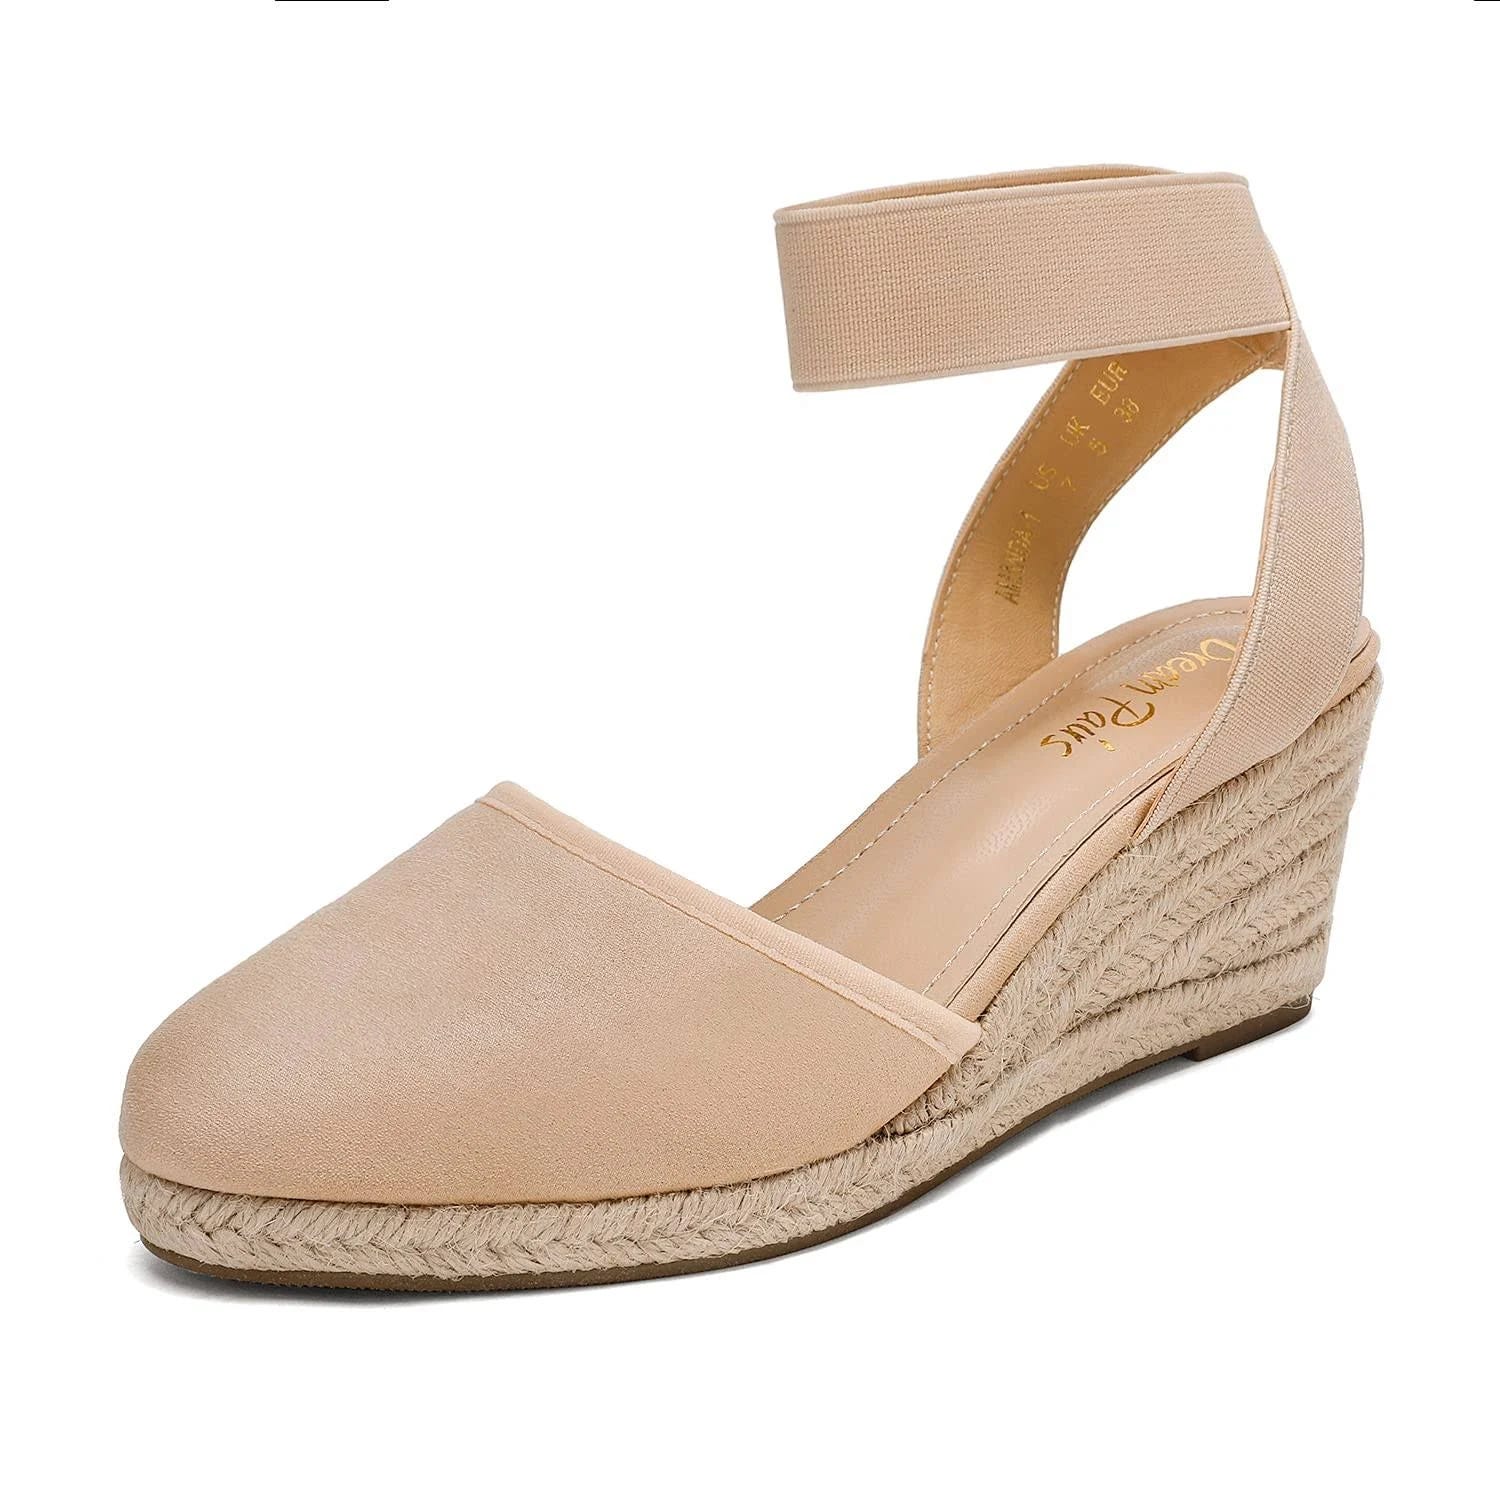 Comfortable Nude Espadrilles with Elastic Ankle Strap | Image